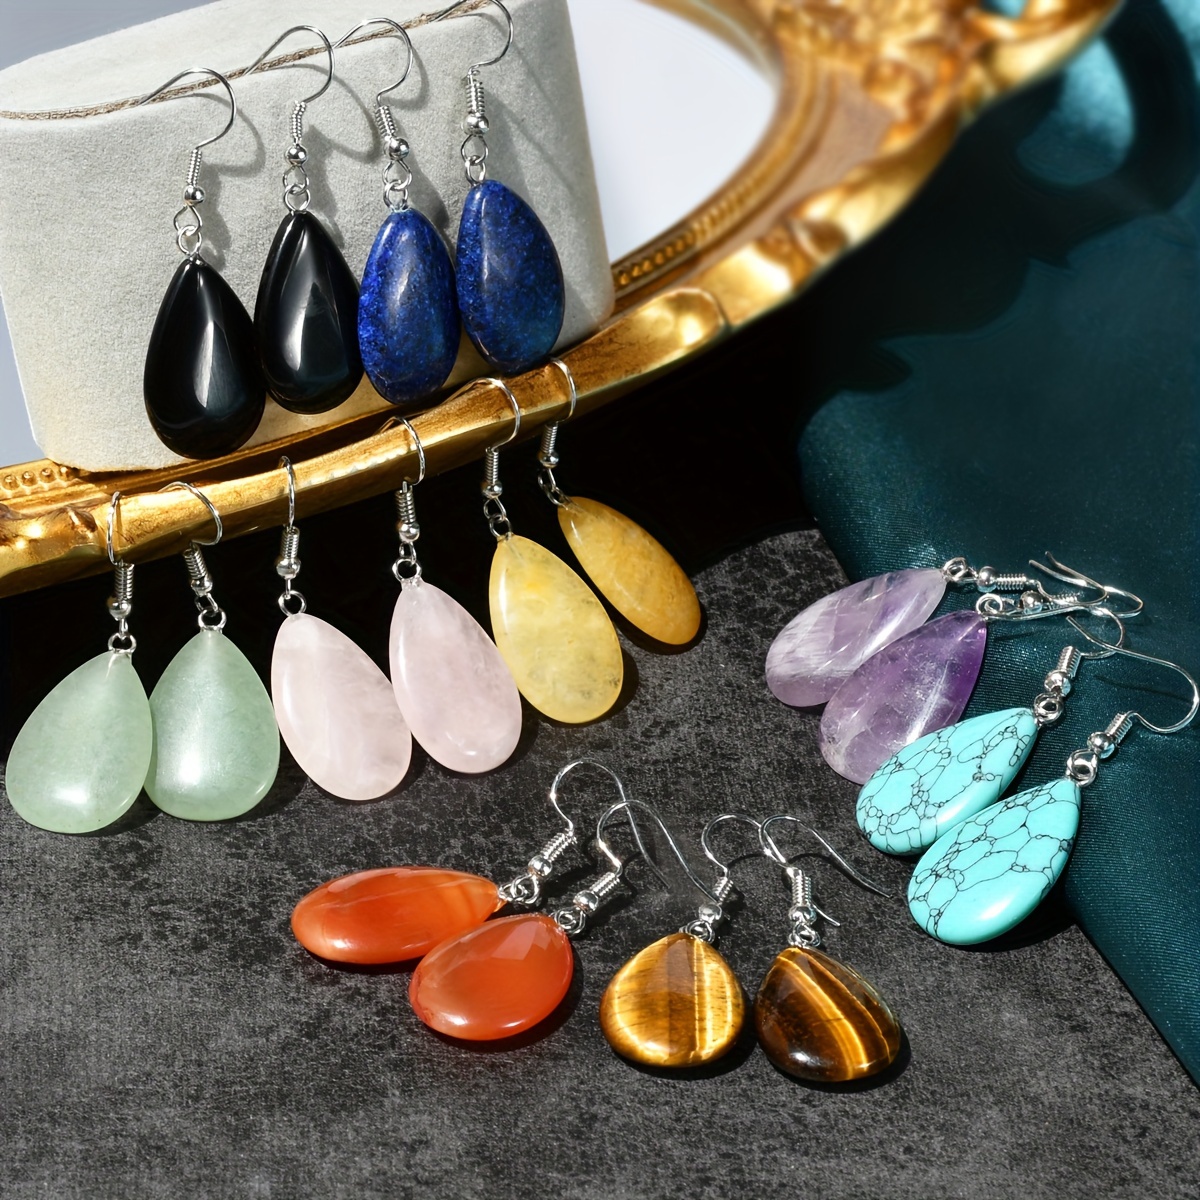 

Bohemian Dangle Earrings Waterdrop Pendant Made Of Natural Crystal Pick A Color U Prefer Match Daily Outfits Party Accessories